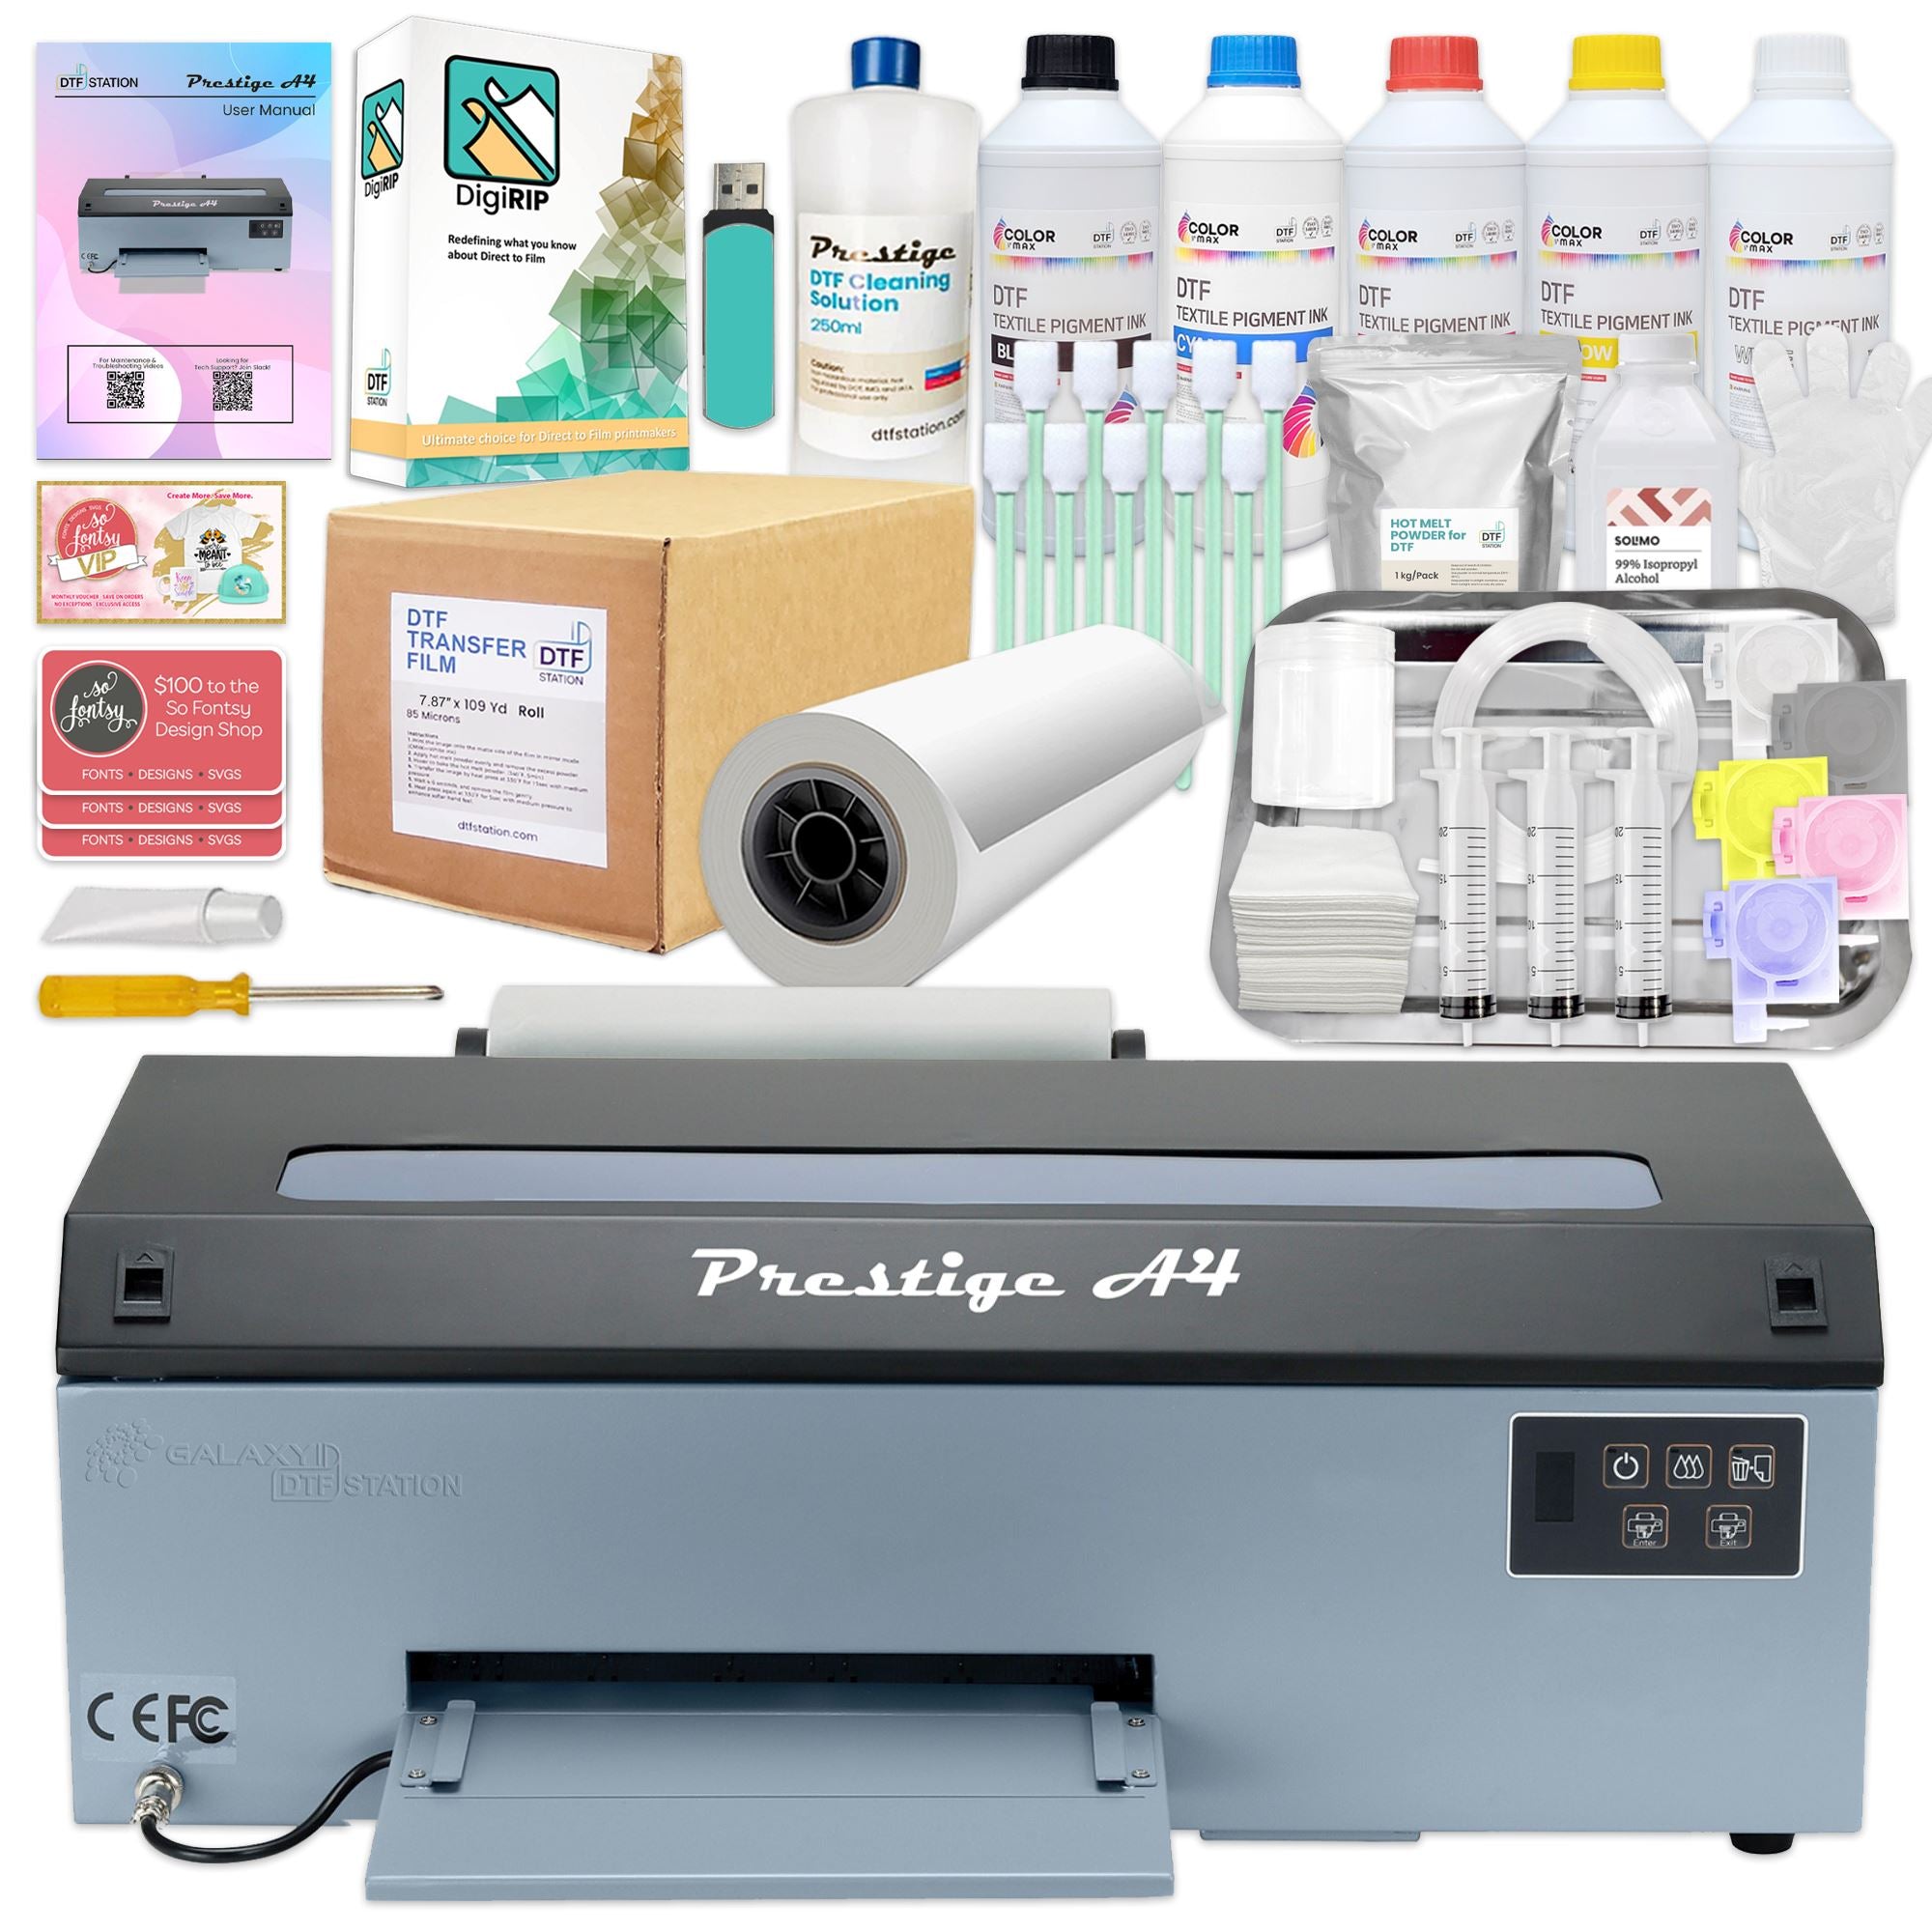 Prestige A4 Direct to Film (DTF) Roll Printer w/ Inks, Supplies - Gray